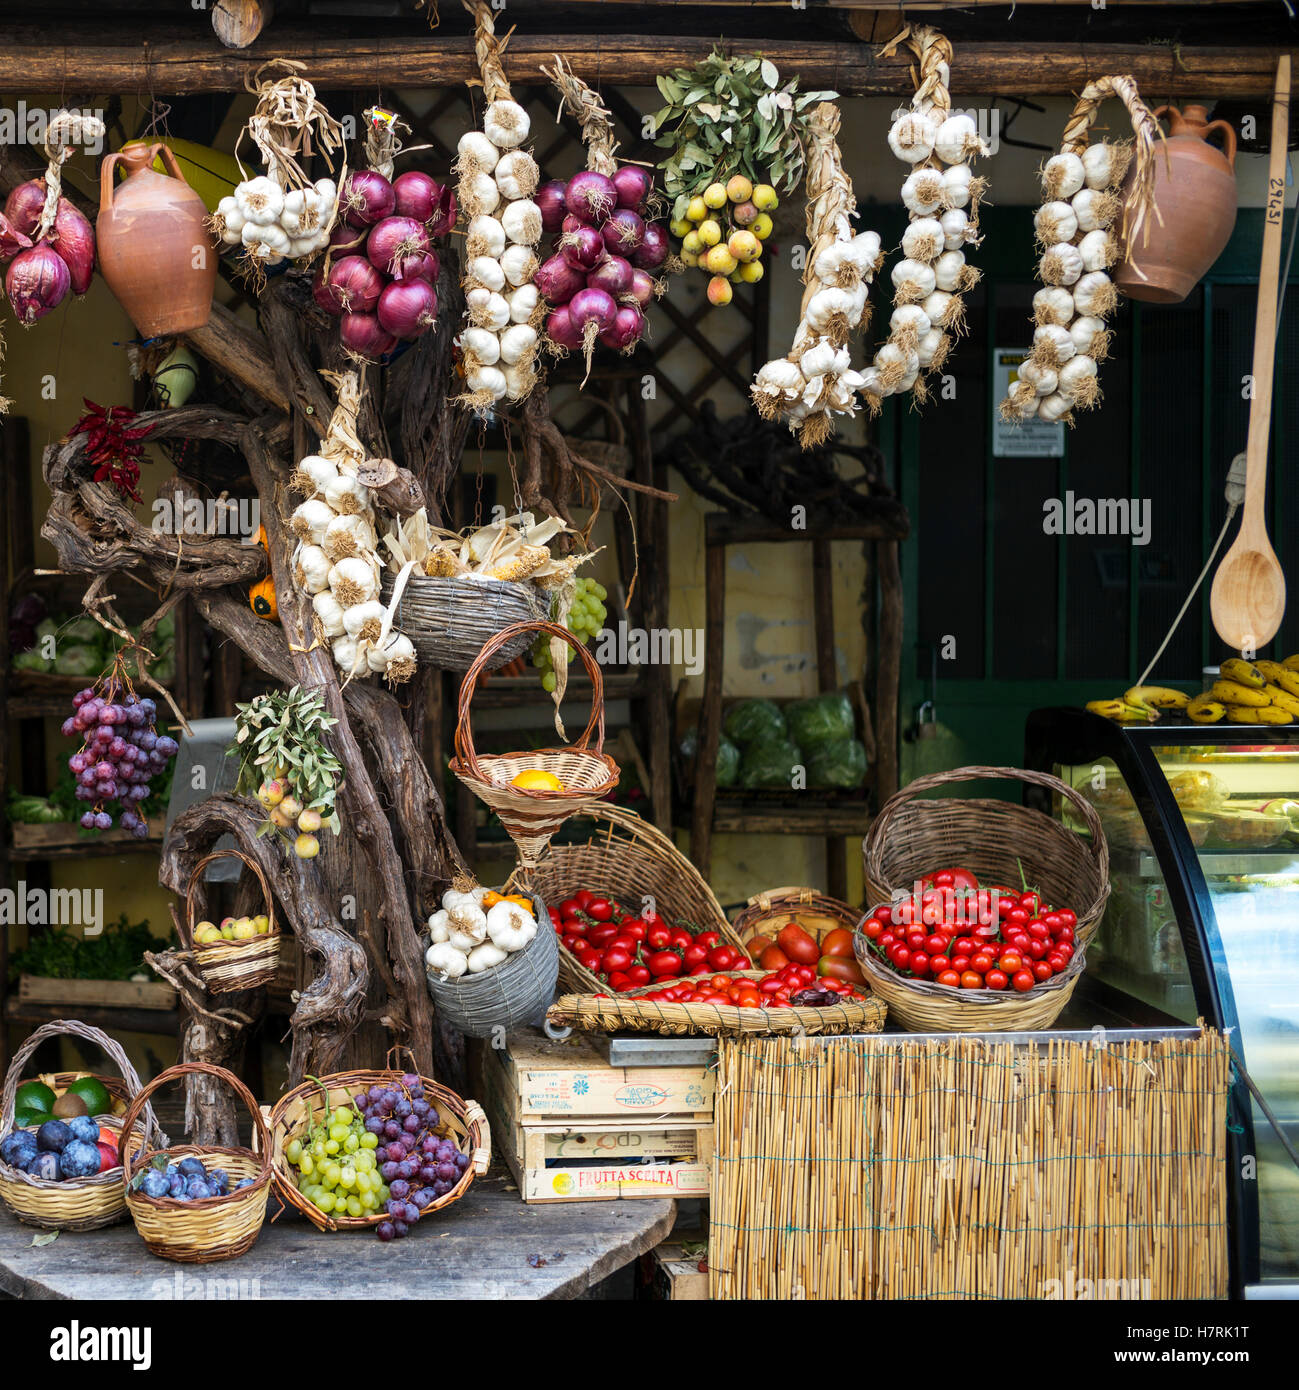 Fresh fruit and vegetables, including hanging garlic and onion, on display for sale at a market; Ischia, Campania, Italy Stock Photo